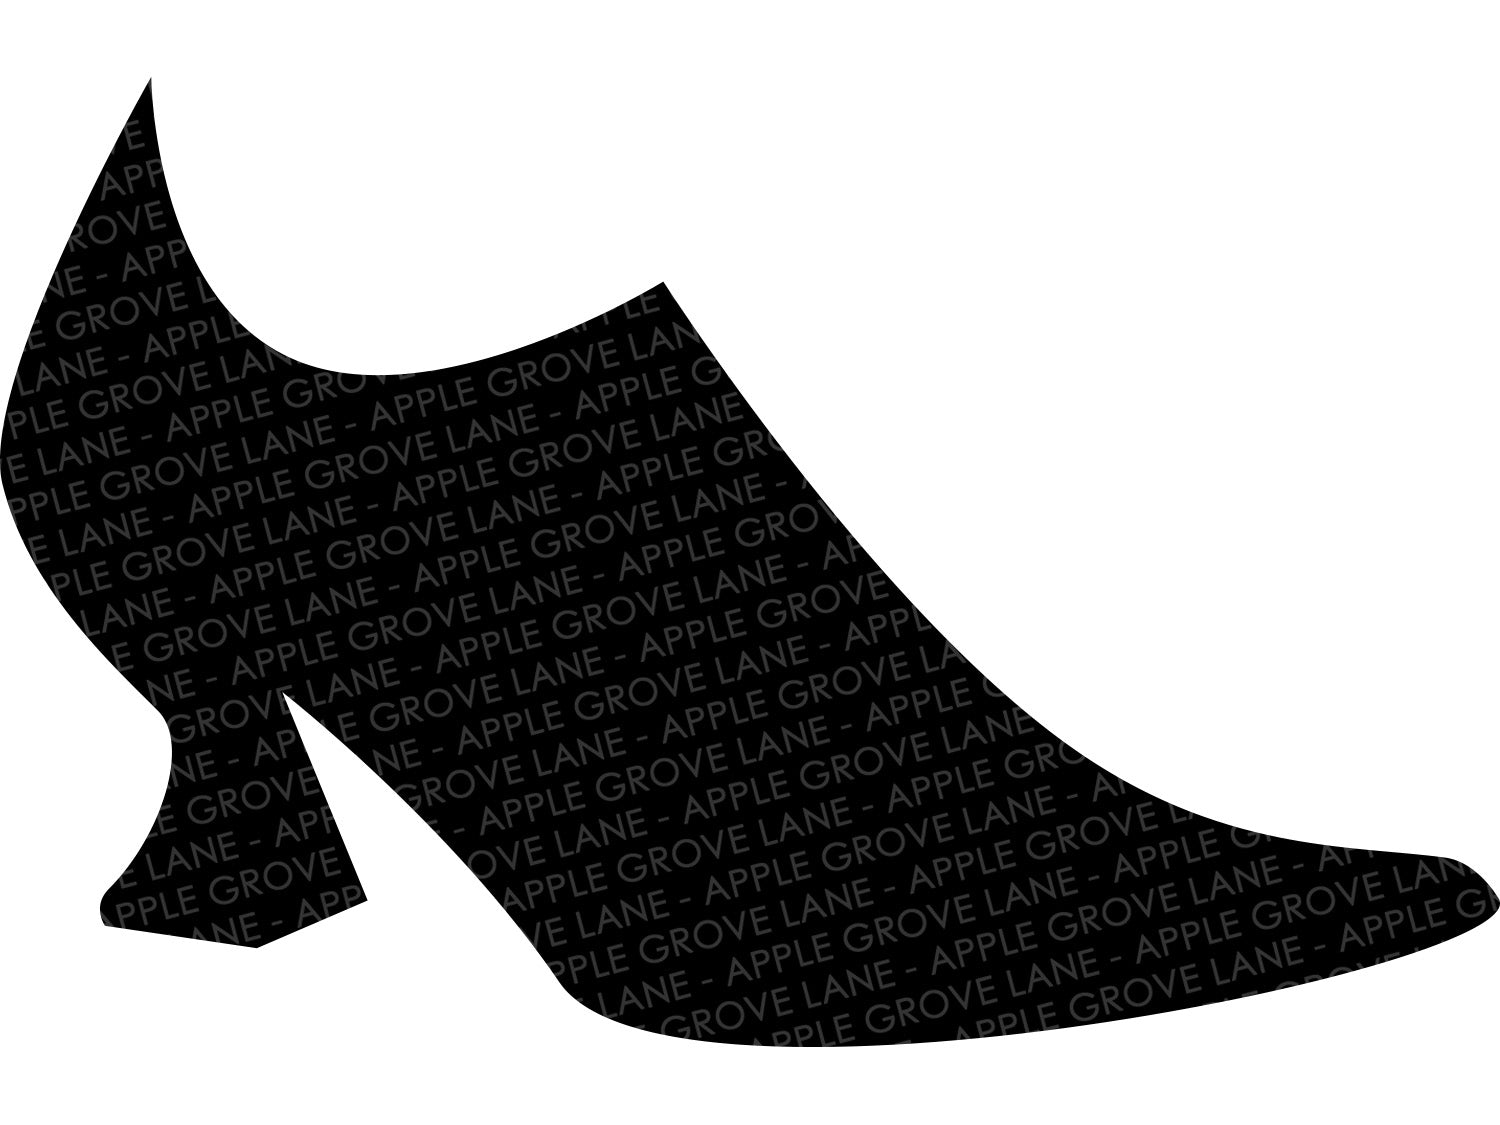 Pointed Shoe Svg - Witch Shoe Svg - High Heel Shoe Svg - Witch Svg - Halloween Svg - Halloween Witch Svg